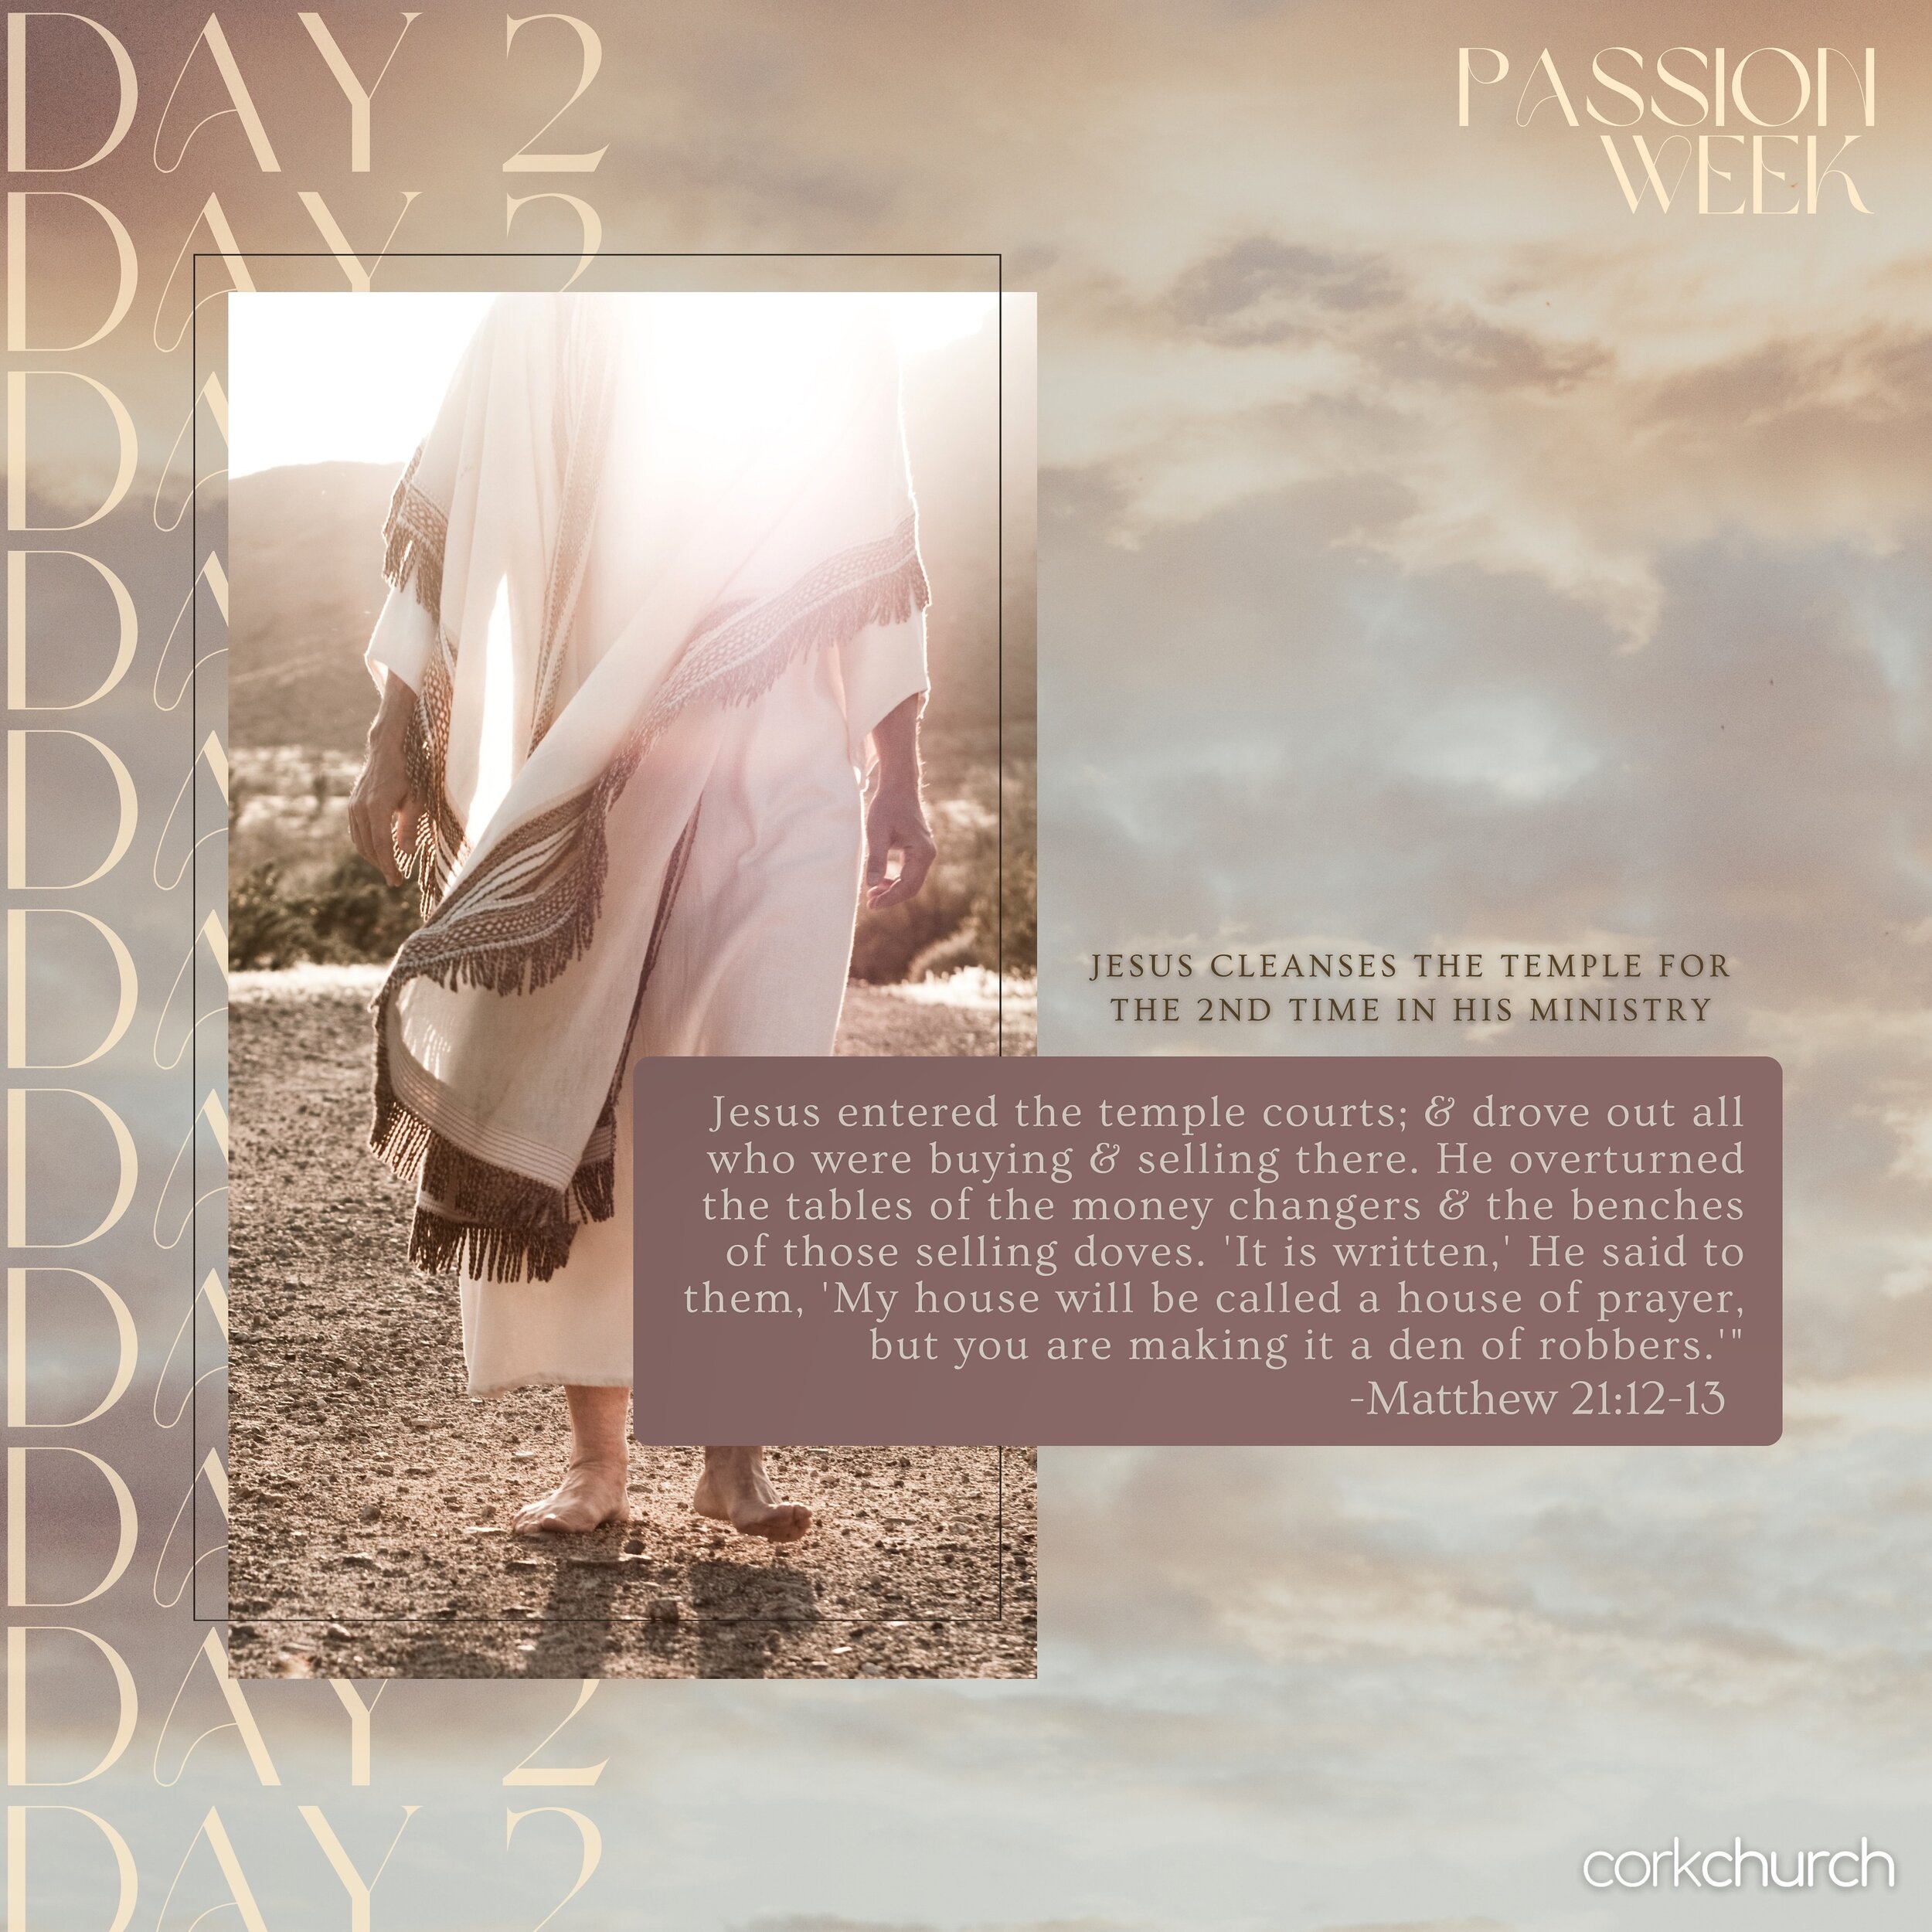 PASSION WEEK: DAY 2

The rest of Matthew 21 is Day 2 of Jesus&rsquo; last week here on earth before He dies &amp; Jesus cleanses the temple for the 2nd time in His ministry.

&ldquo;Jesus entered the temple courts &amp; drove out all who were buying 